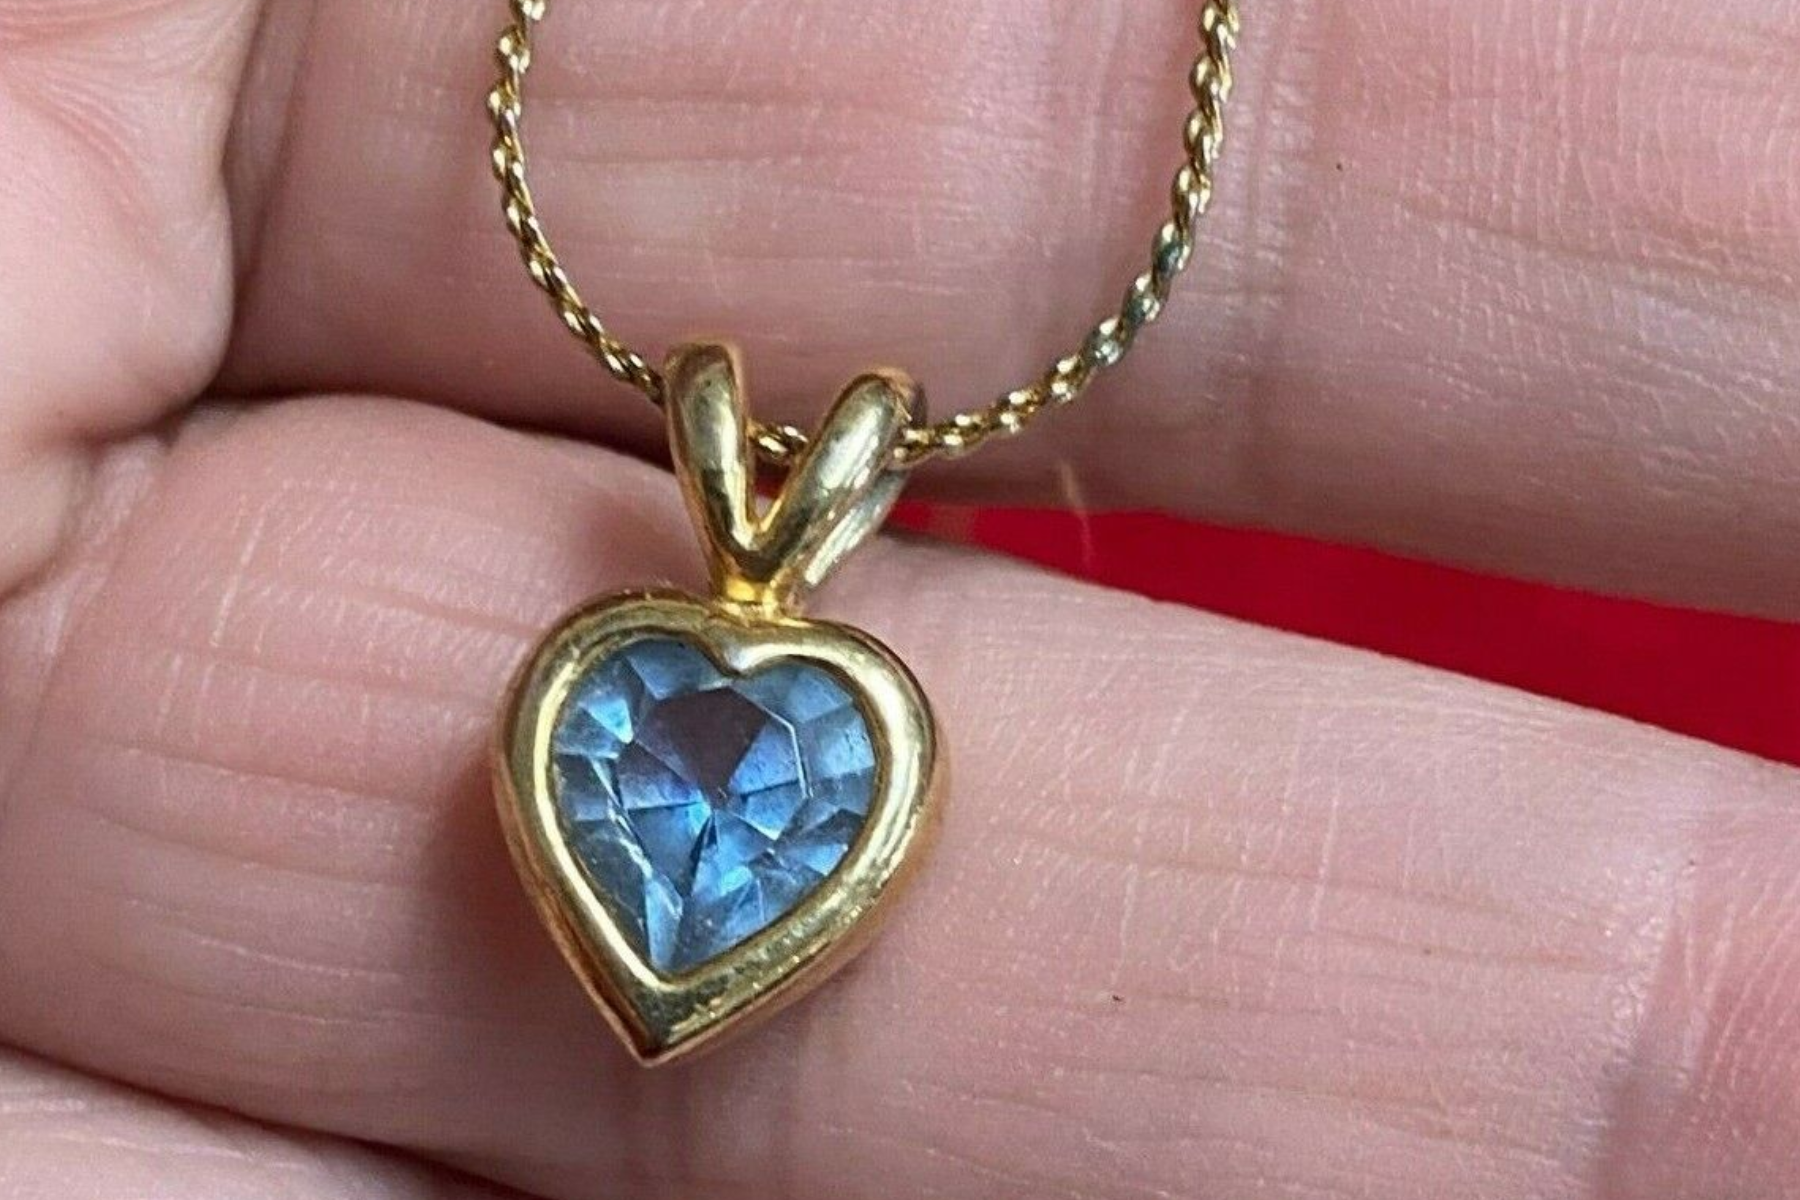 A woman's palm with a blue stone set in a gold heart pendant